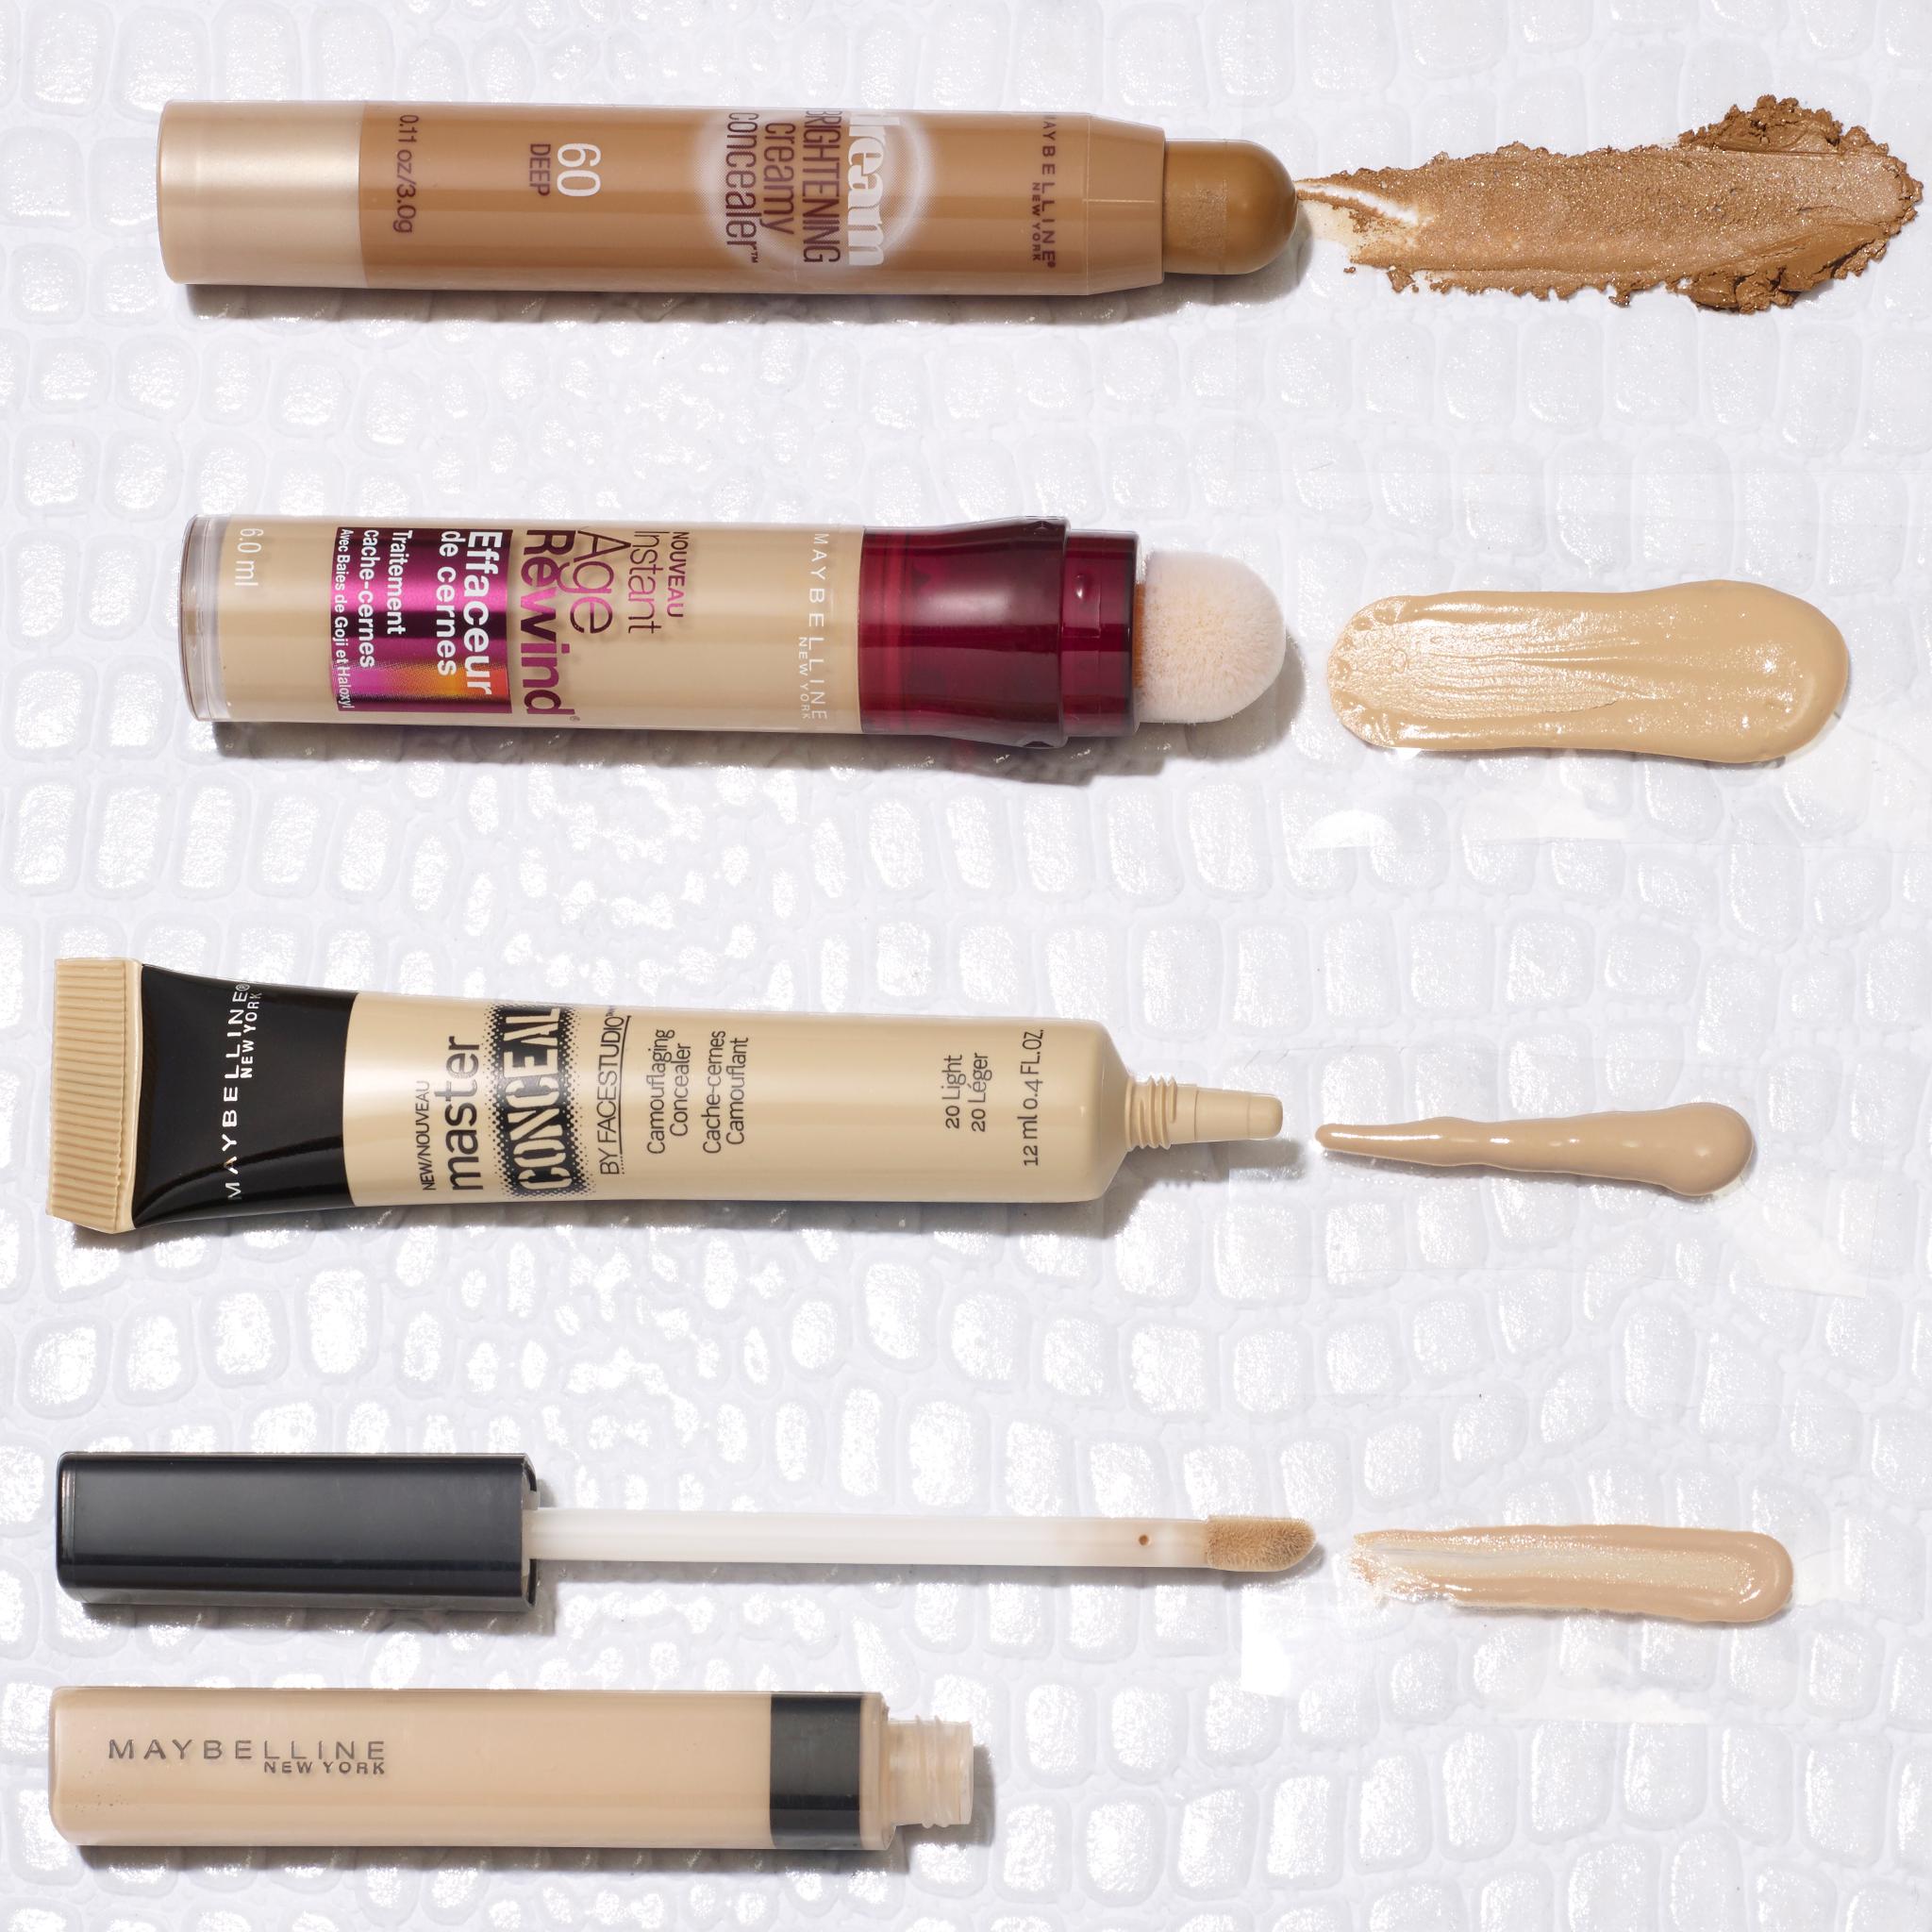 Maybelline New York on "Crazy for these 🙌 From top to bottom: dream brightening creamy instant age rewind, master conceal and fit me! Which one is your go-to?